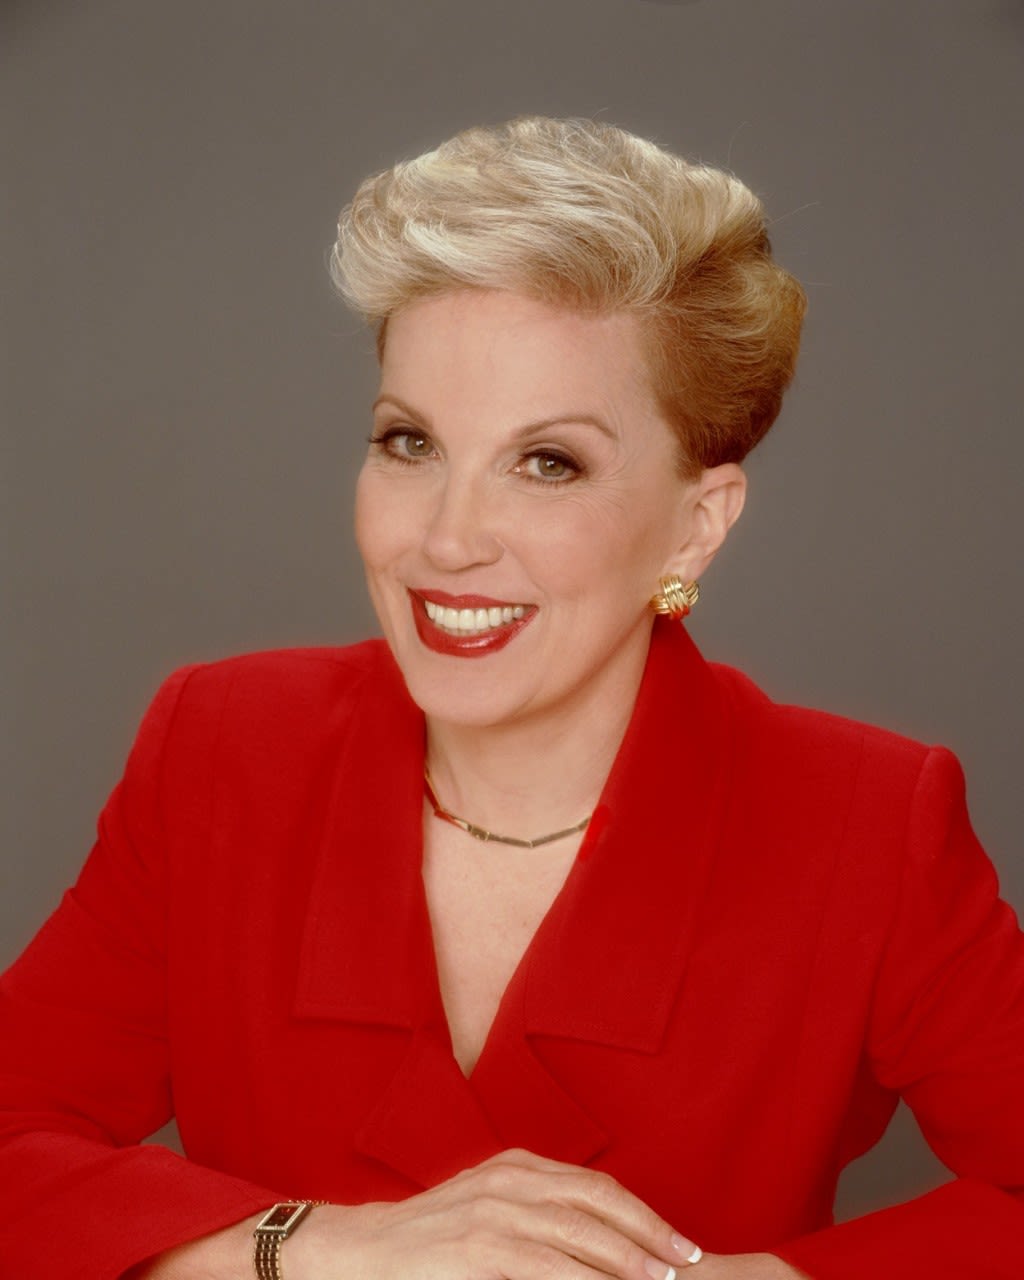 Dear Abby: Struggling to cope after workplace crush